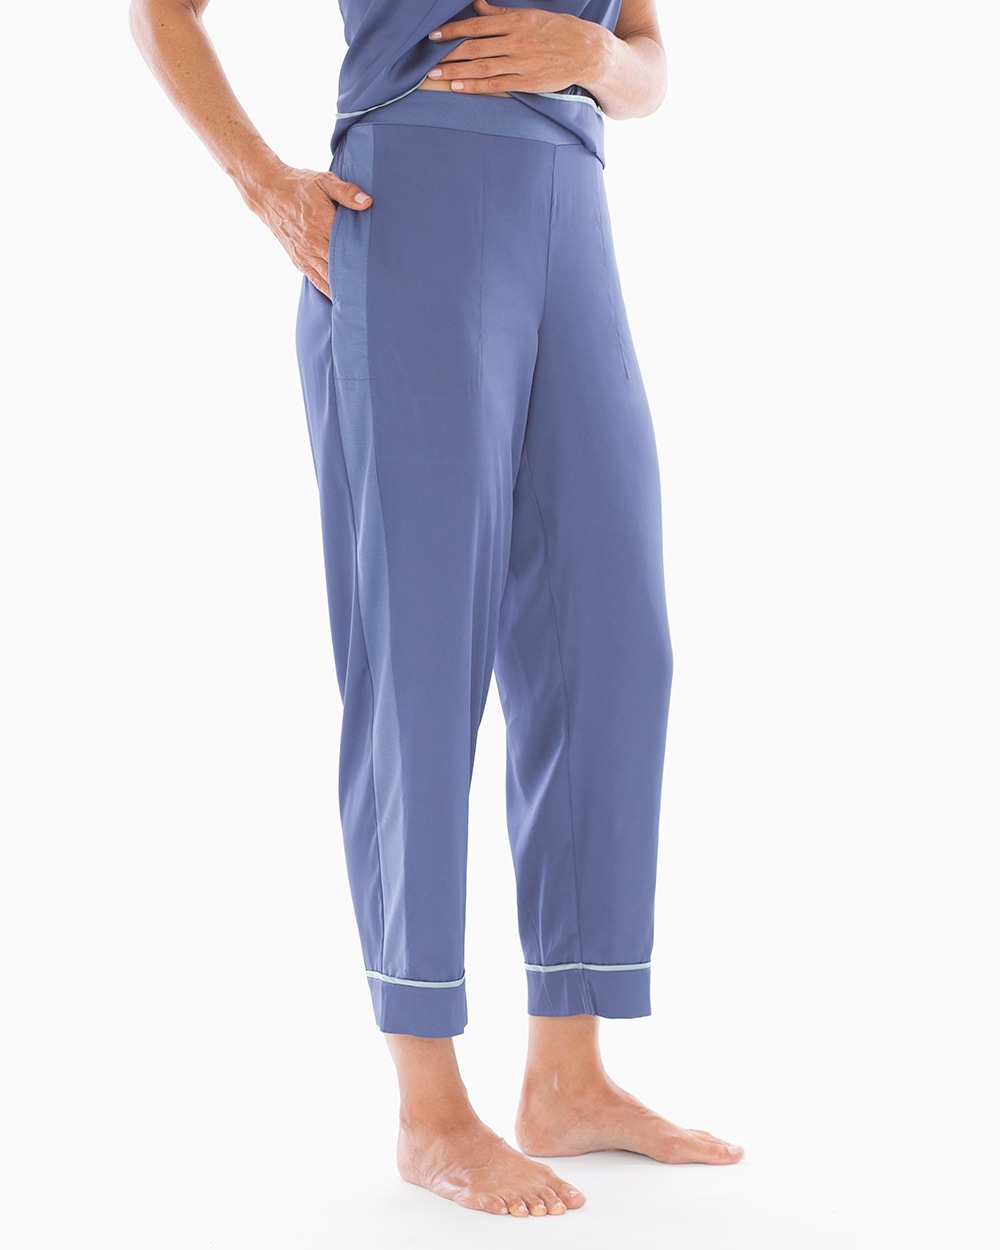 Stretch Satin with Cool Nights Trim Ankle Sleep Pants Grecian Blue